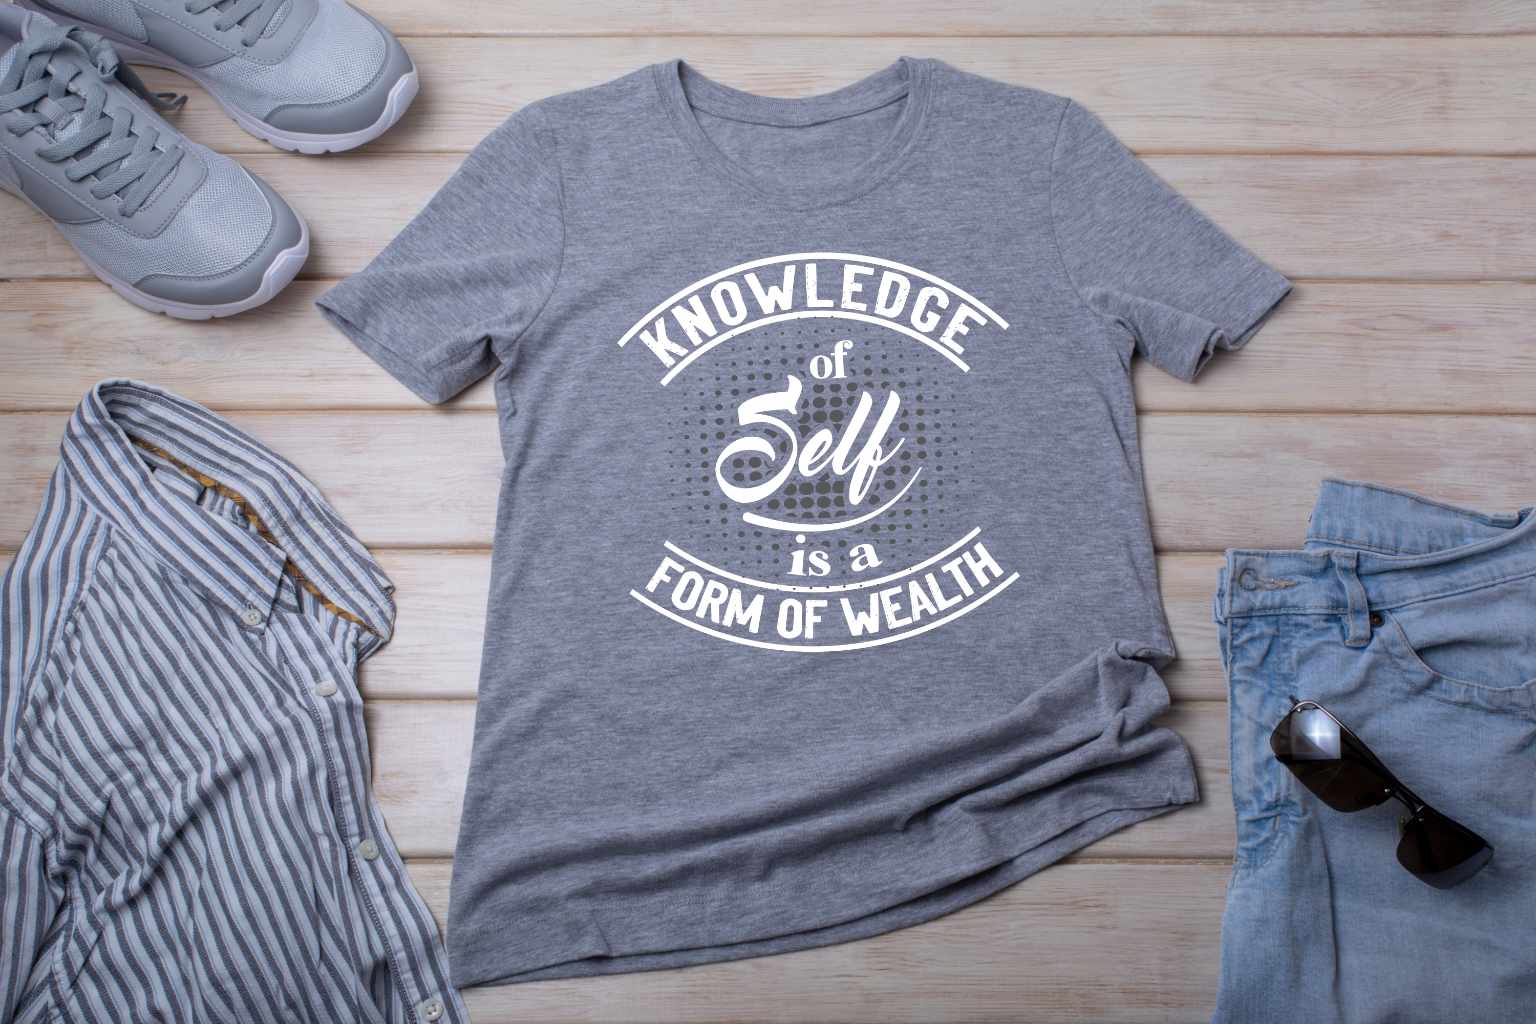 Knowledge Of Self Is A Form Of Wealth Unisex Softstyle T-Shirt - knowledge of self short sleeve tee sport gray - Shujaa Designs